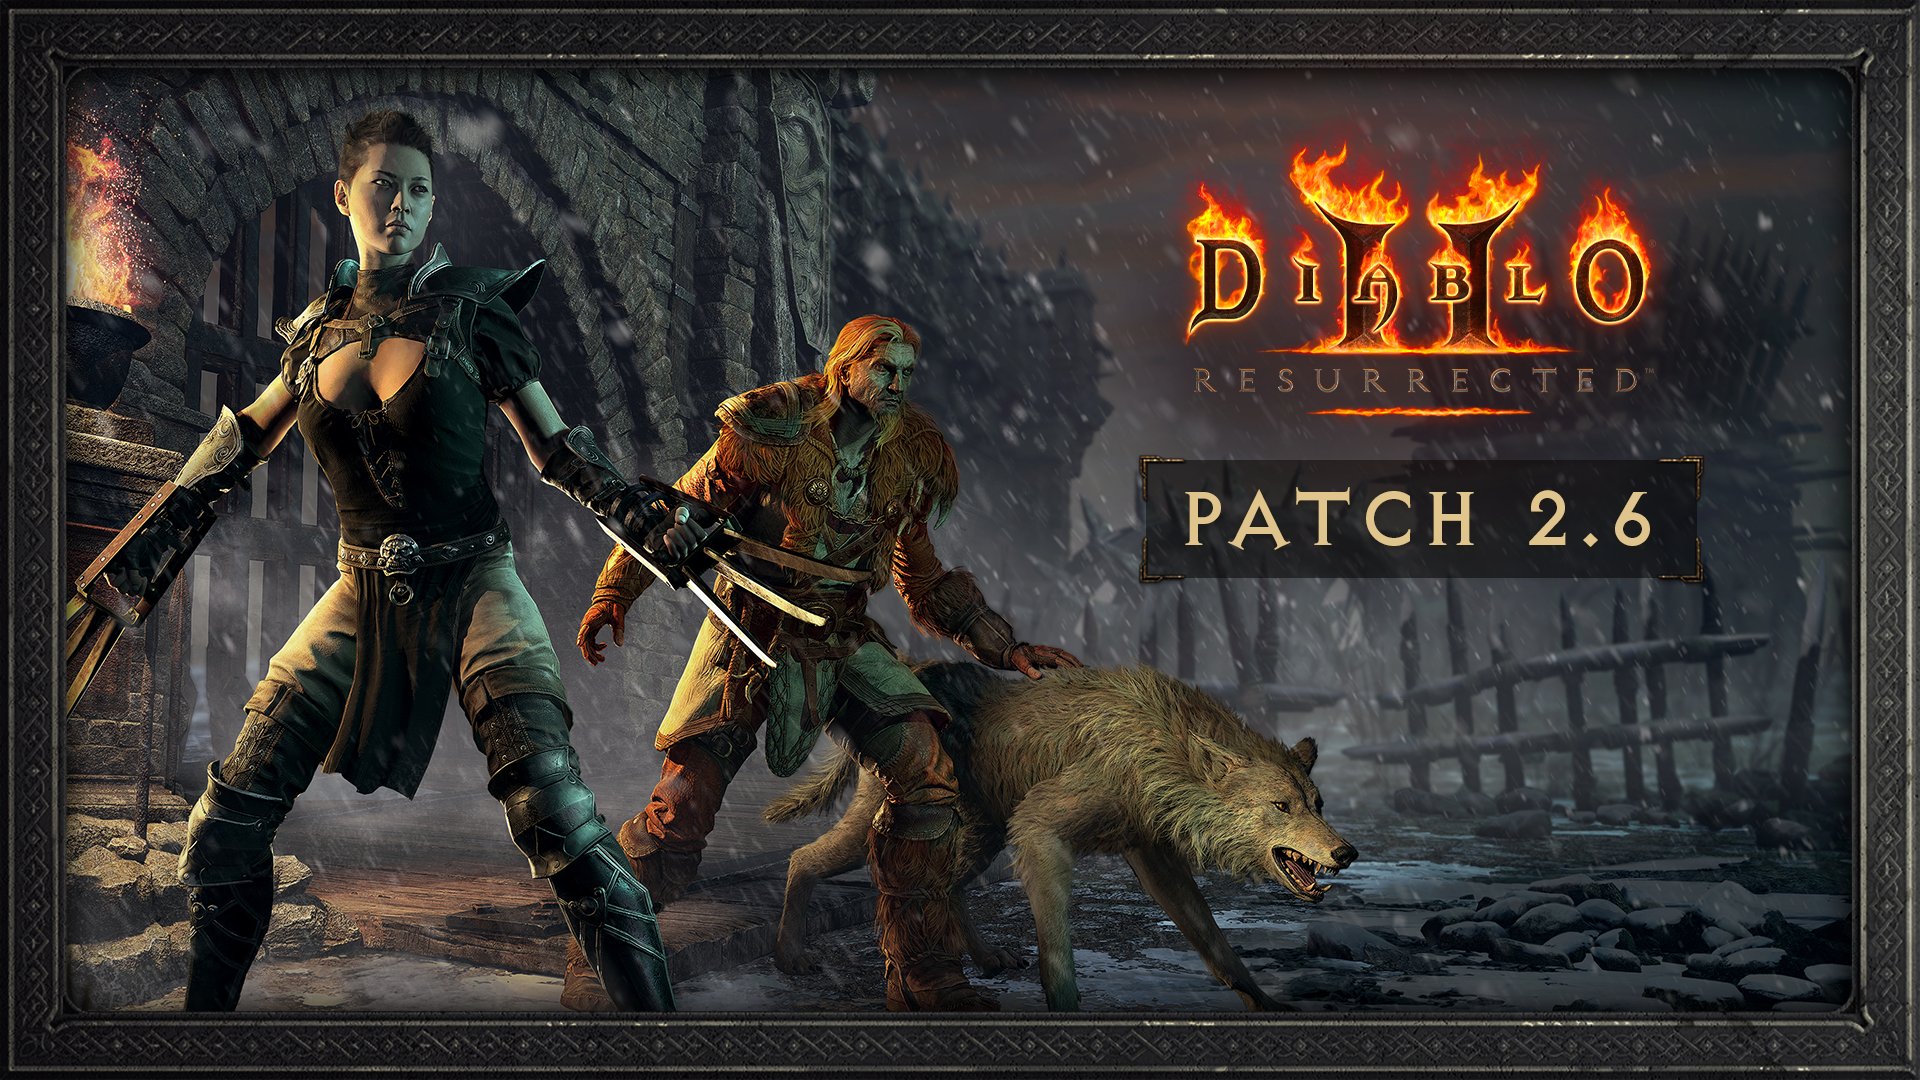 Diablo 2 Assassin and Druid in the snow, next to a Diablo 2 Resurrected logo and text that reads, patch 2.6.